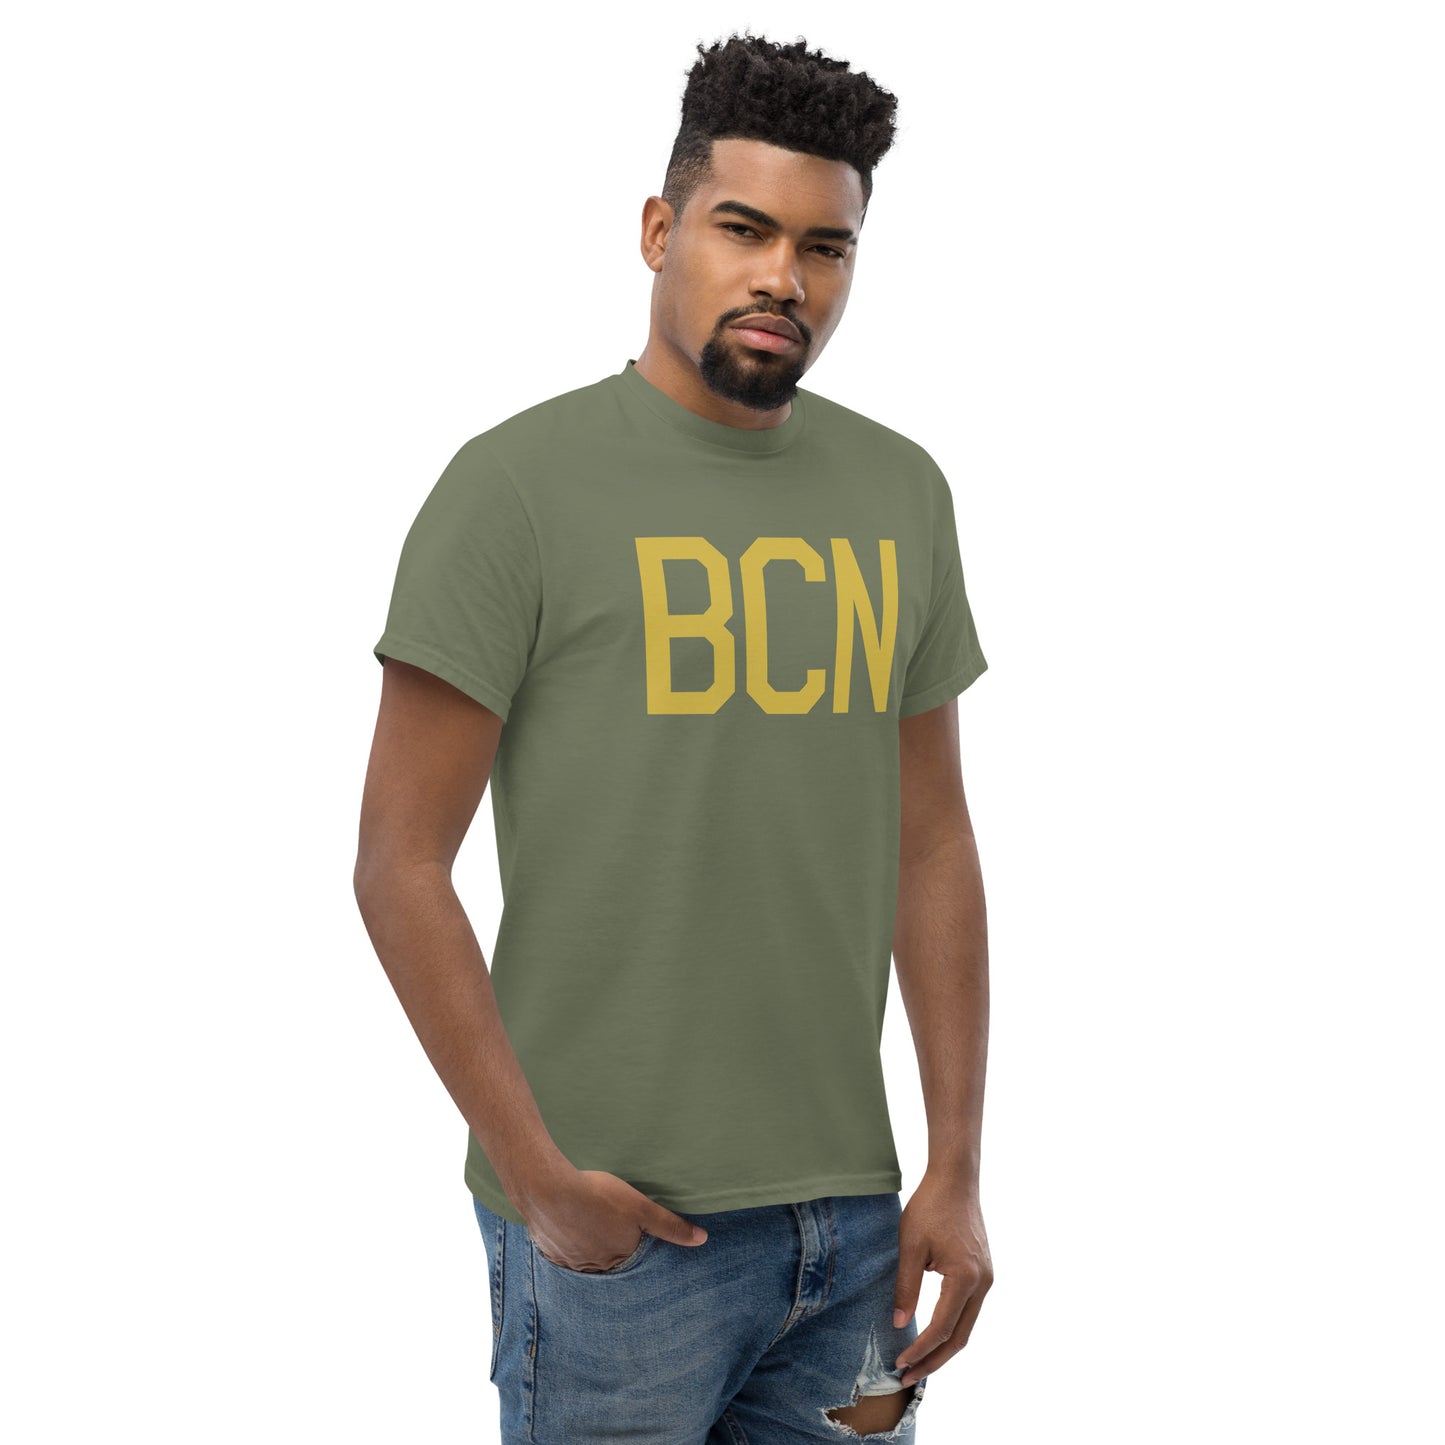 Aviation Enthusiast Men's Tee - Old Gold Graphic • BCN Barcelona • YHM Designs - Image 08